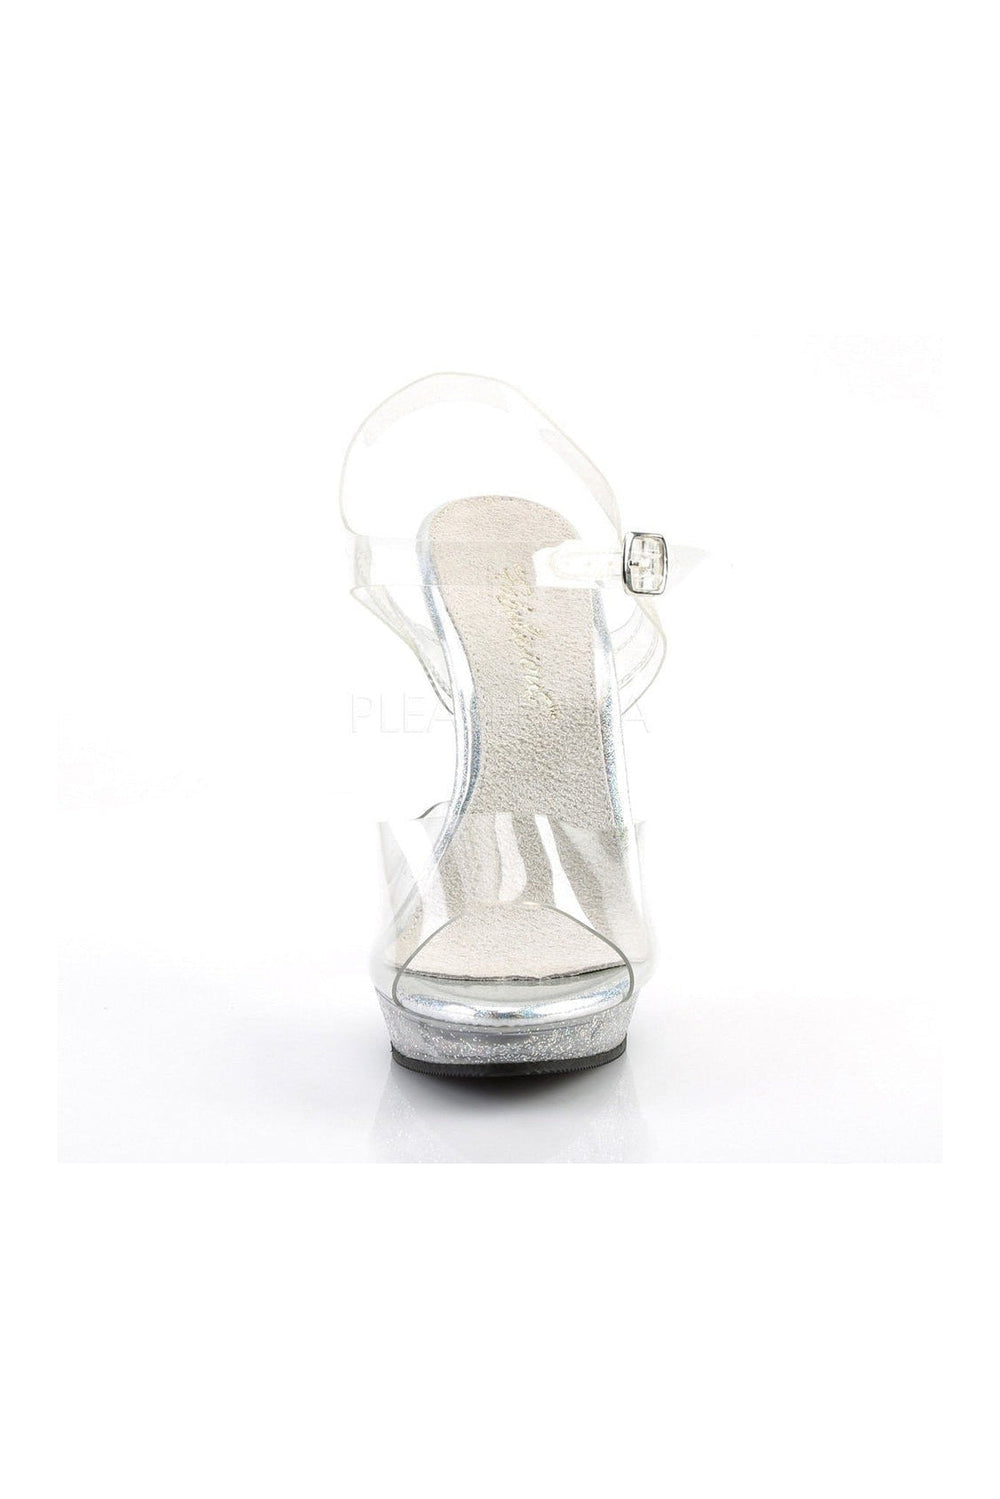 LIP-108MG Sandal | Clear Vinyl-Fabulicious-Sandals-SEXYSHOES.COM